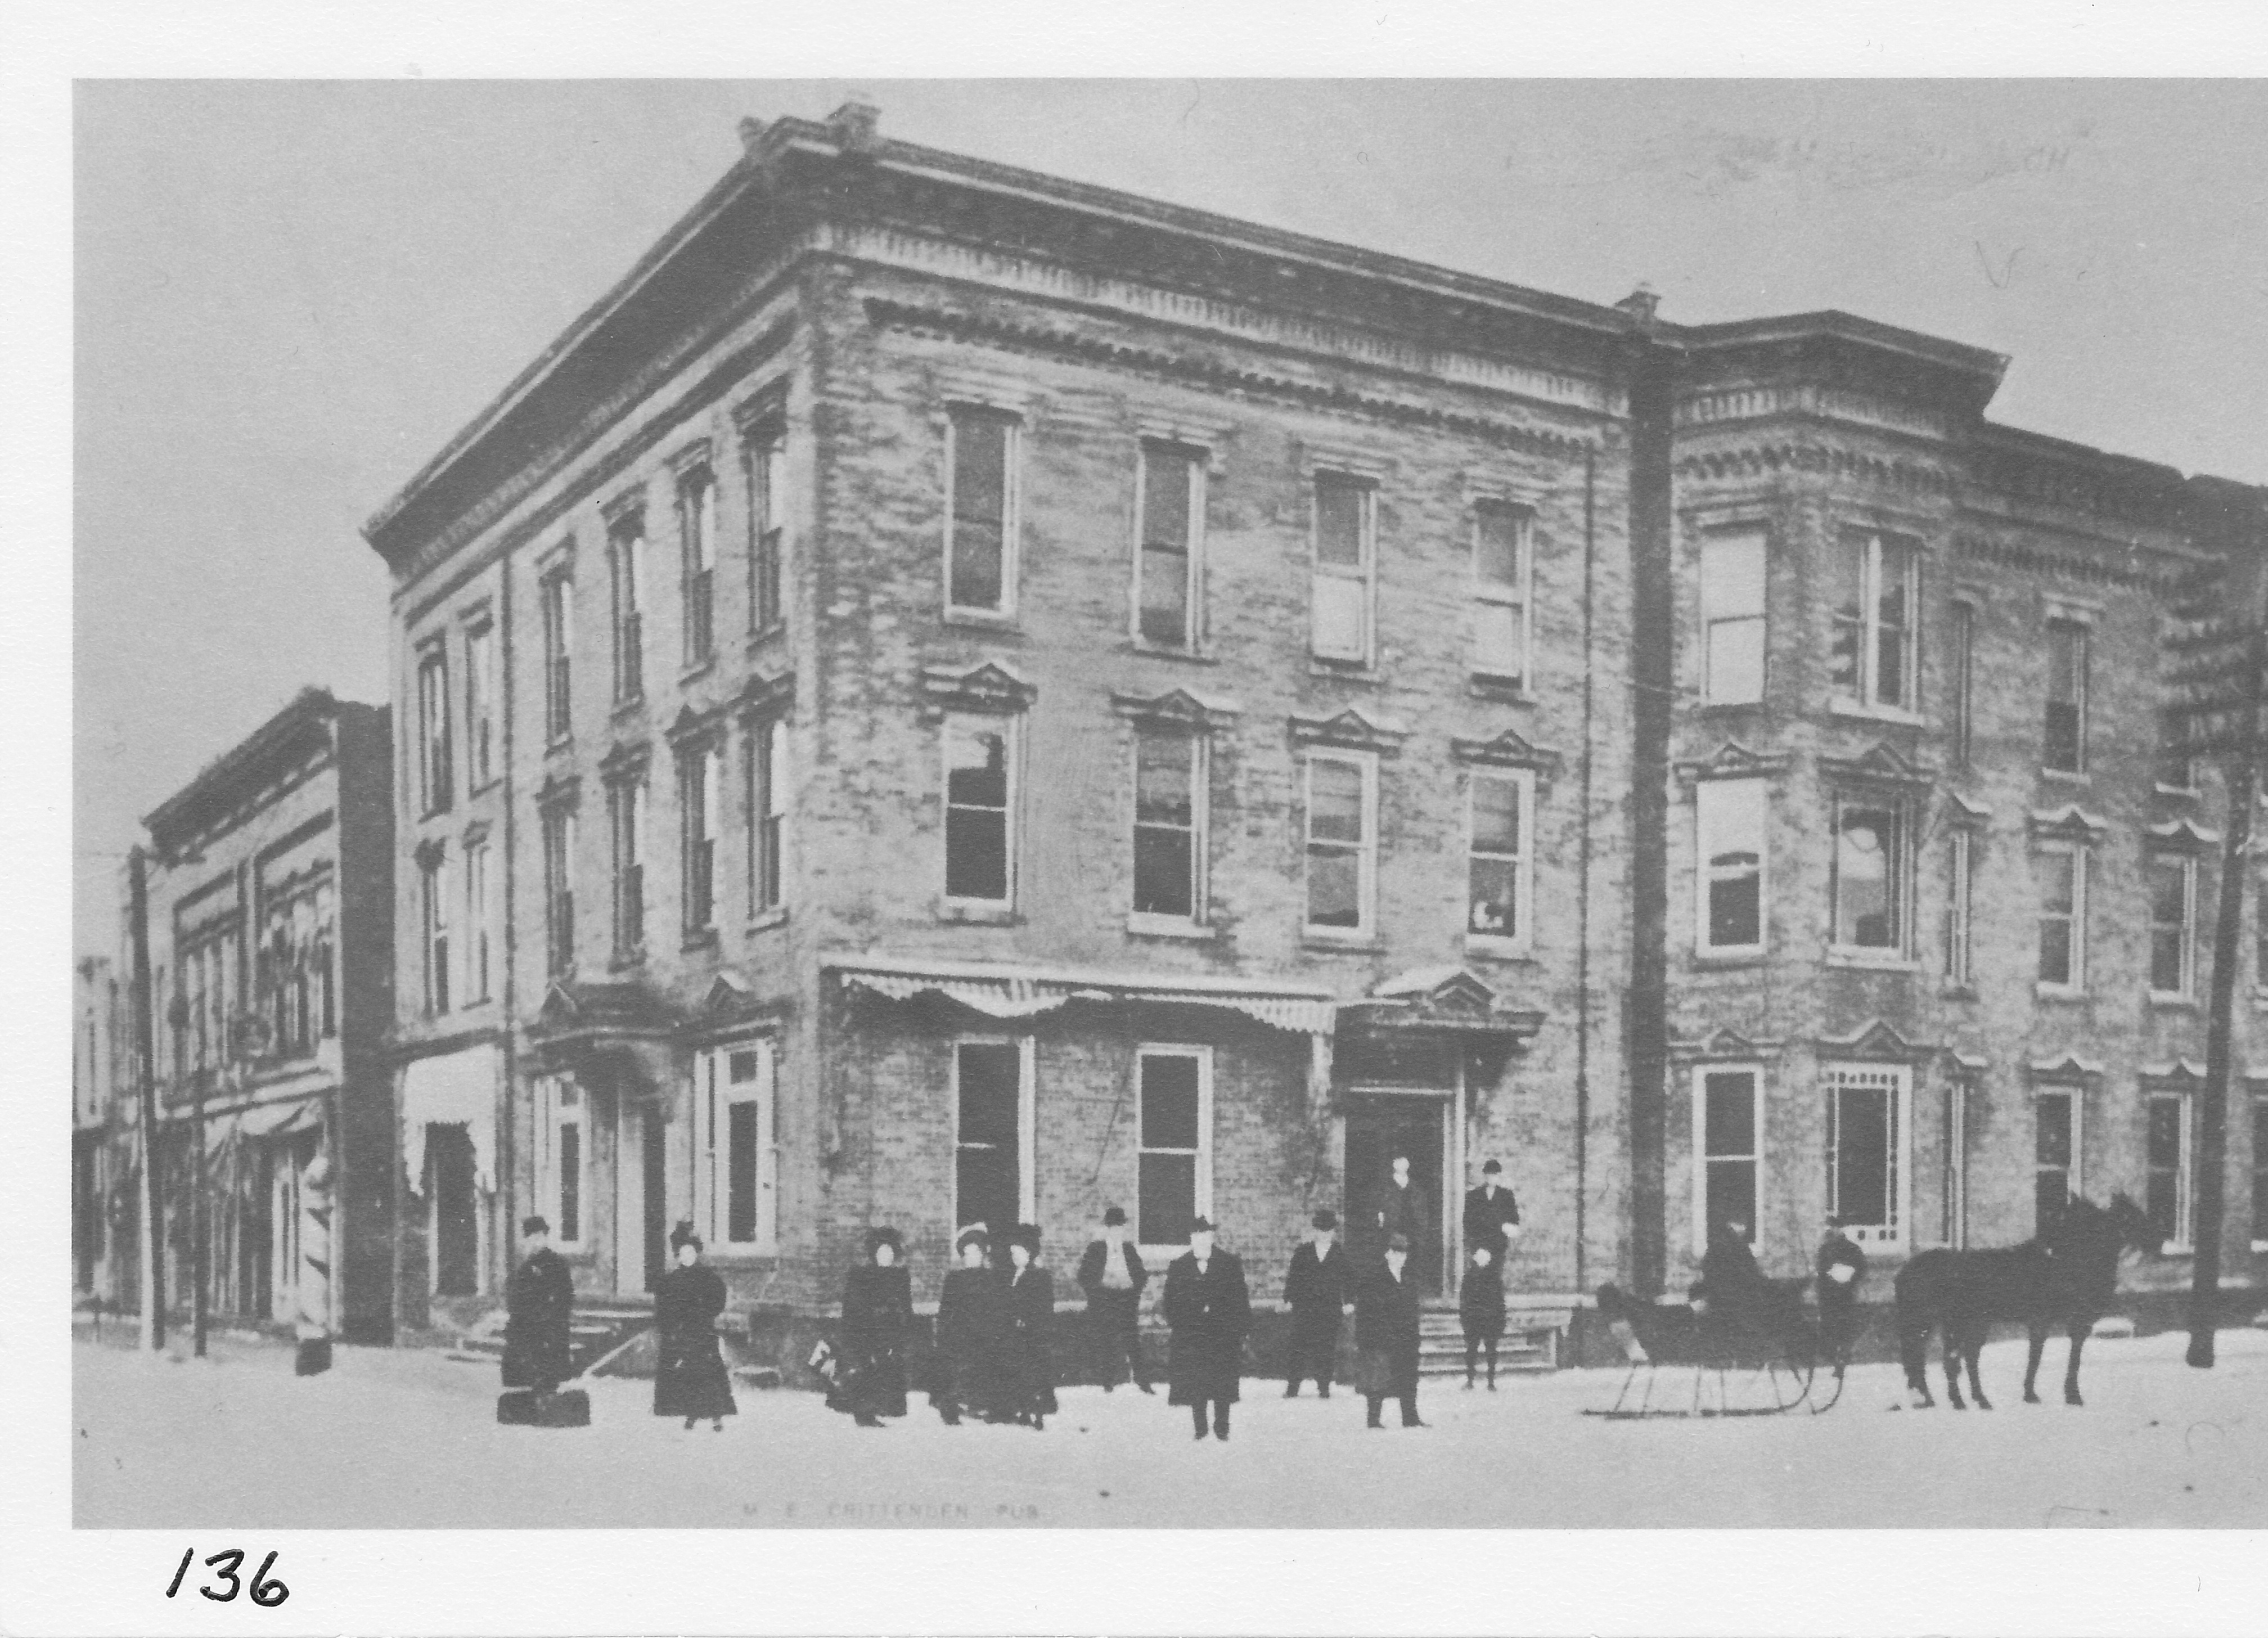 Hotel Saulsbury. Built in 1889 by Cary S. Saulsbury on the northwest corner of Main and North streets. The first meal was served Nov. 7, 1889. Demolished in 1970.